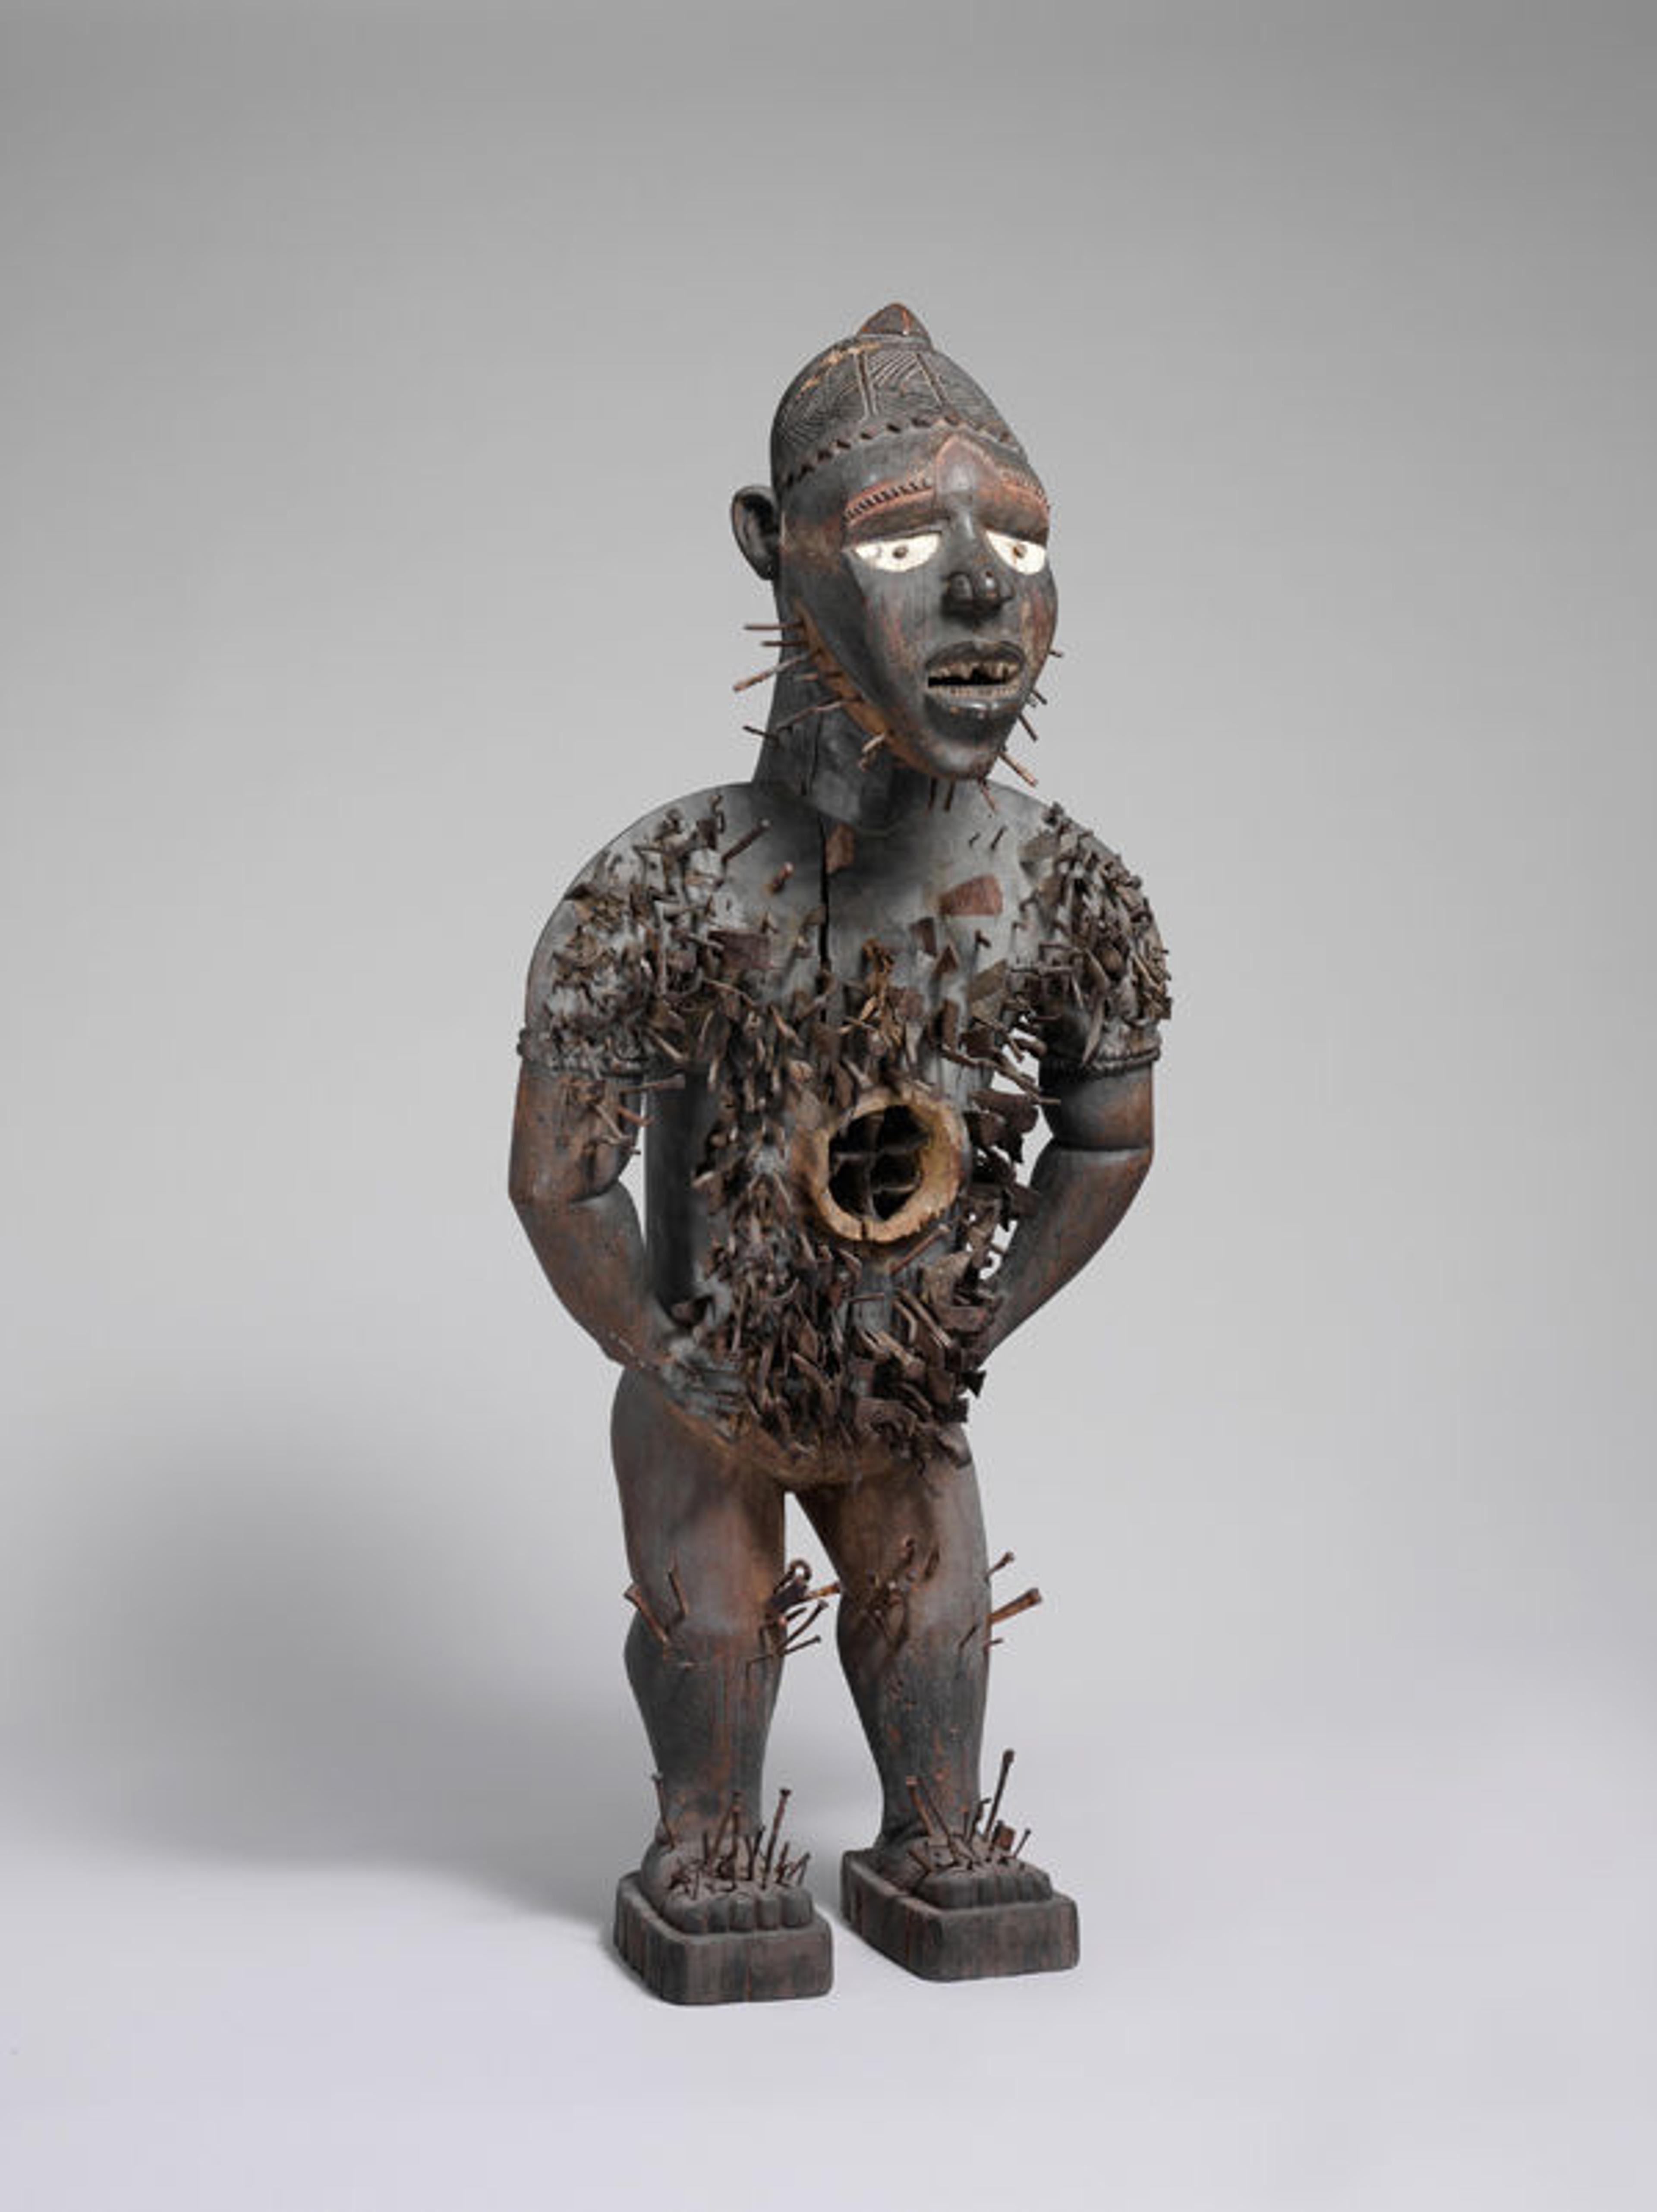 Power Figure (Nkisi N'Kondi: Mangaaka), 19th century. Republic of the Congo or Cabinda, Angola, Chiloango River region. Kongo peoples; Yombe group. Wood, paint, metal, resin, ceramic; H. 46 1/2 in. (118 cm), W. 19 1/2 in. (49.5 cm), D. 15 1/2 in. (39.4 cm). The Metropolitan Museum of Art, New York,  Purchase, Lila Acheson Wallace, Drs. Daniel and Marian Malcolm, Laura G. and James J. Ross, Jeffrey B. Soref, The Robert T. Wall Family, Dr. and Mrs. Sidney G. Clyman, and Steven Kossak Gifts, 2008 (2008.30)